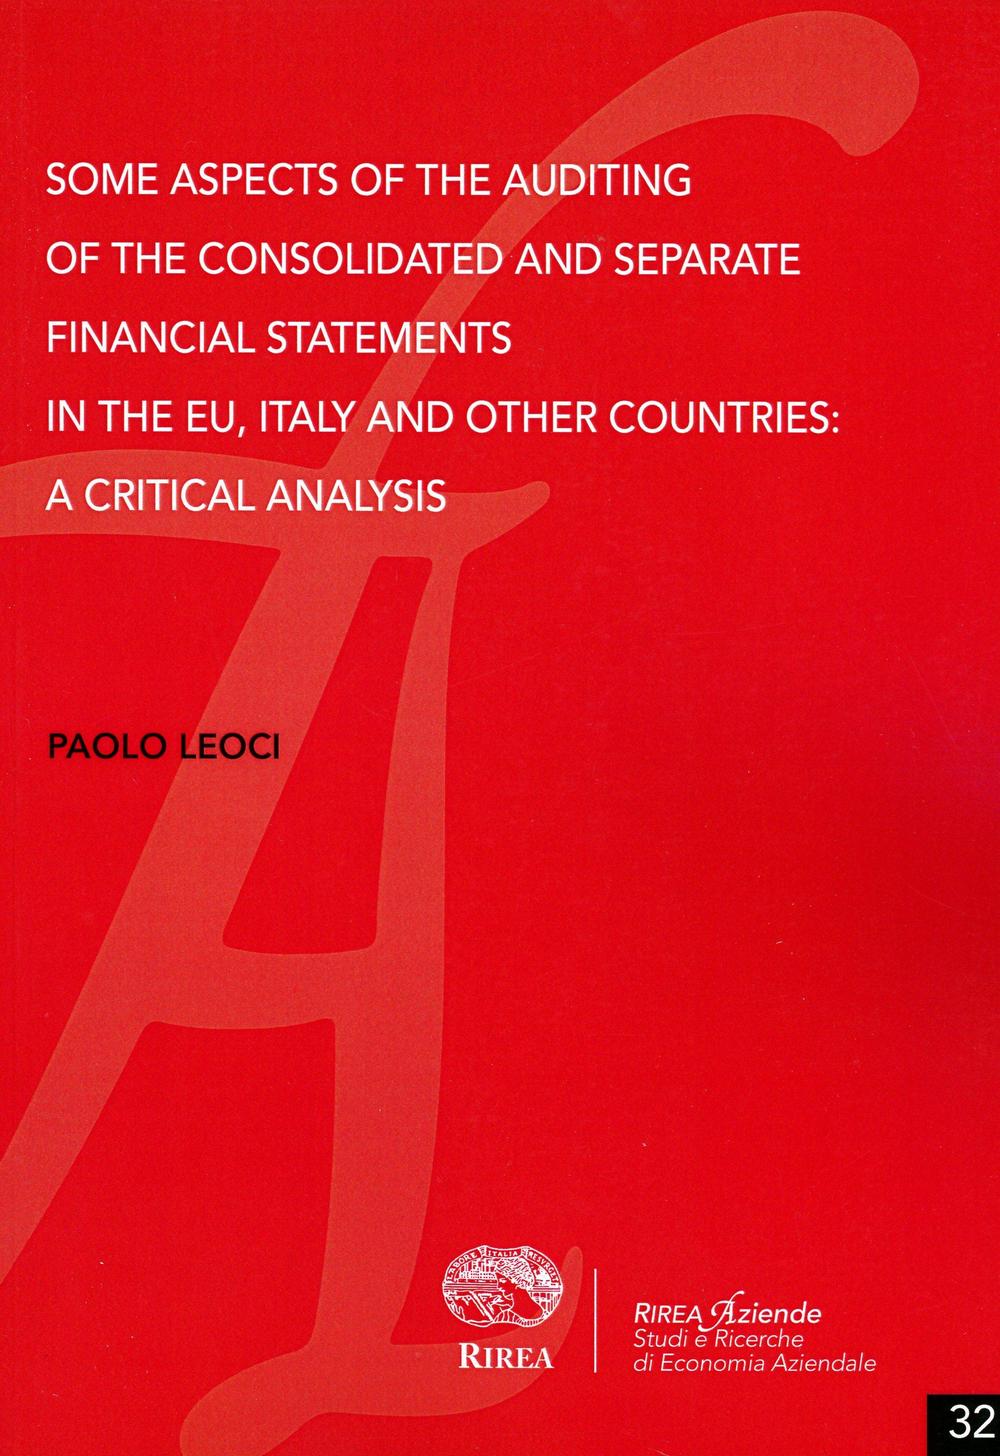 Some aspects of the auditing of the consolidated and separate financial statements in the EU, Italy and other countries. A critical analysis